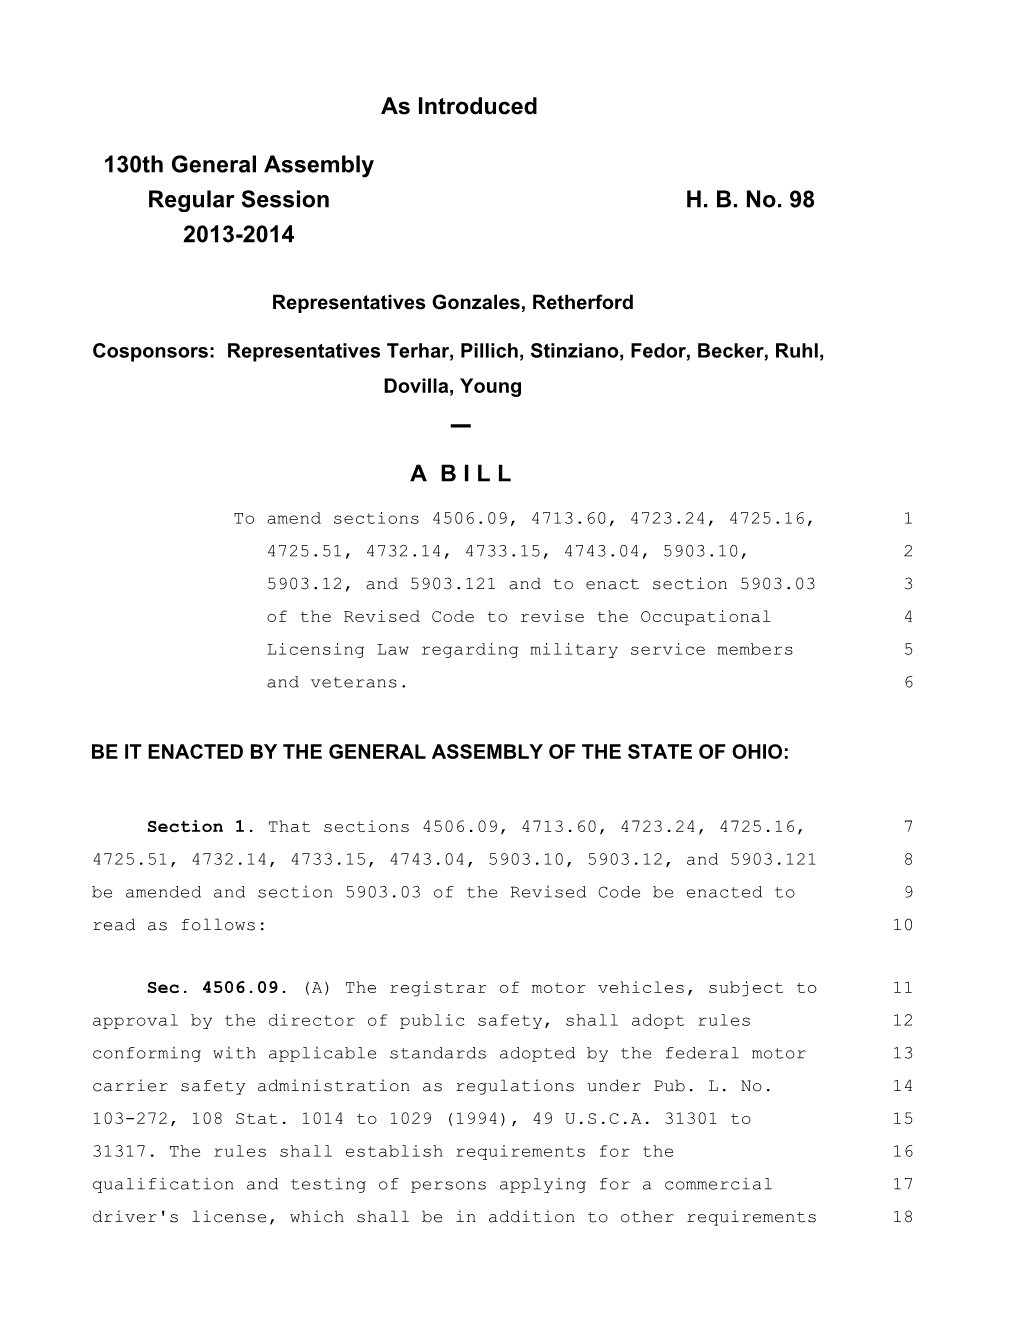 As Introduced 130Th General Assembly Regular Session H. B. No. 98 2013-2014 a BILL